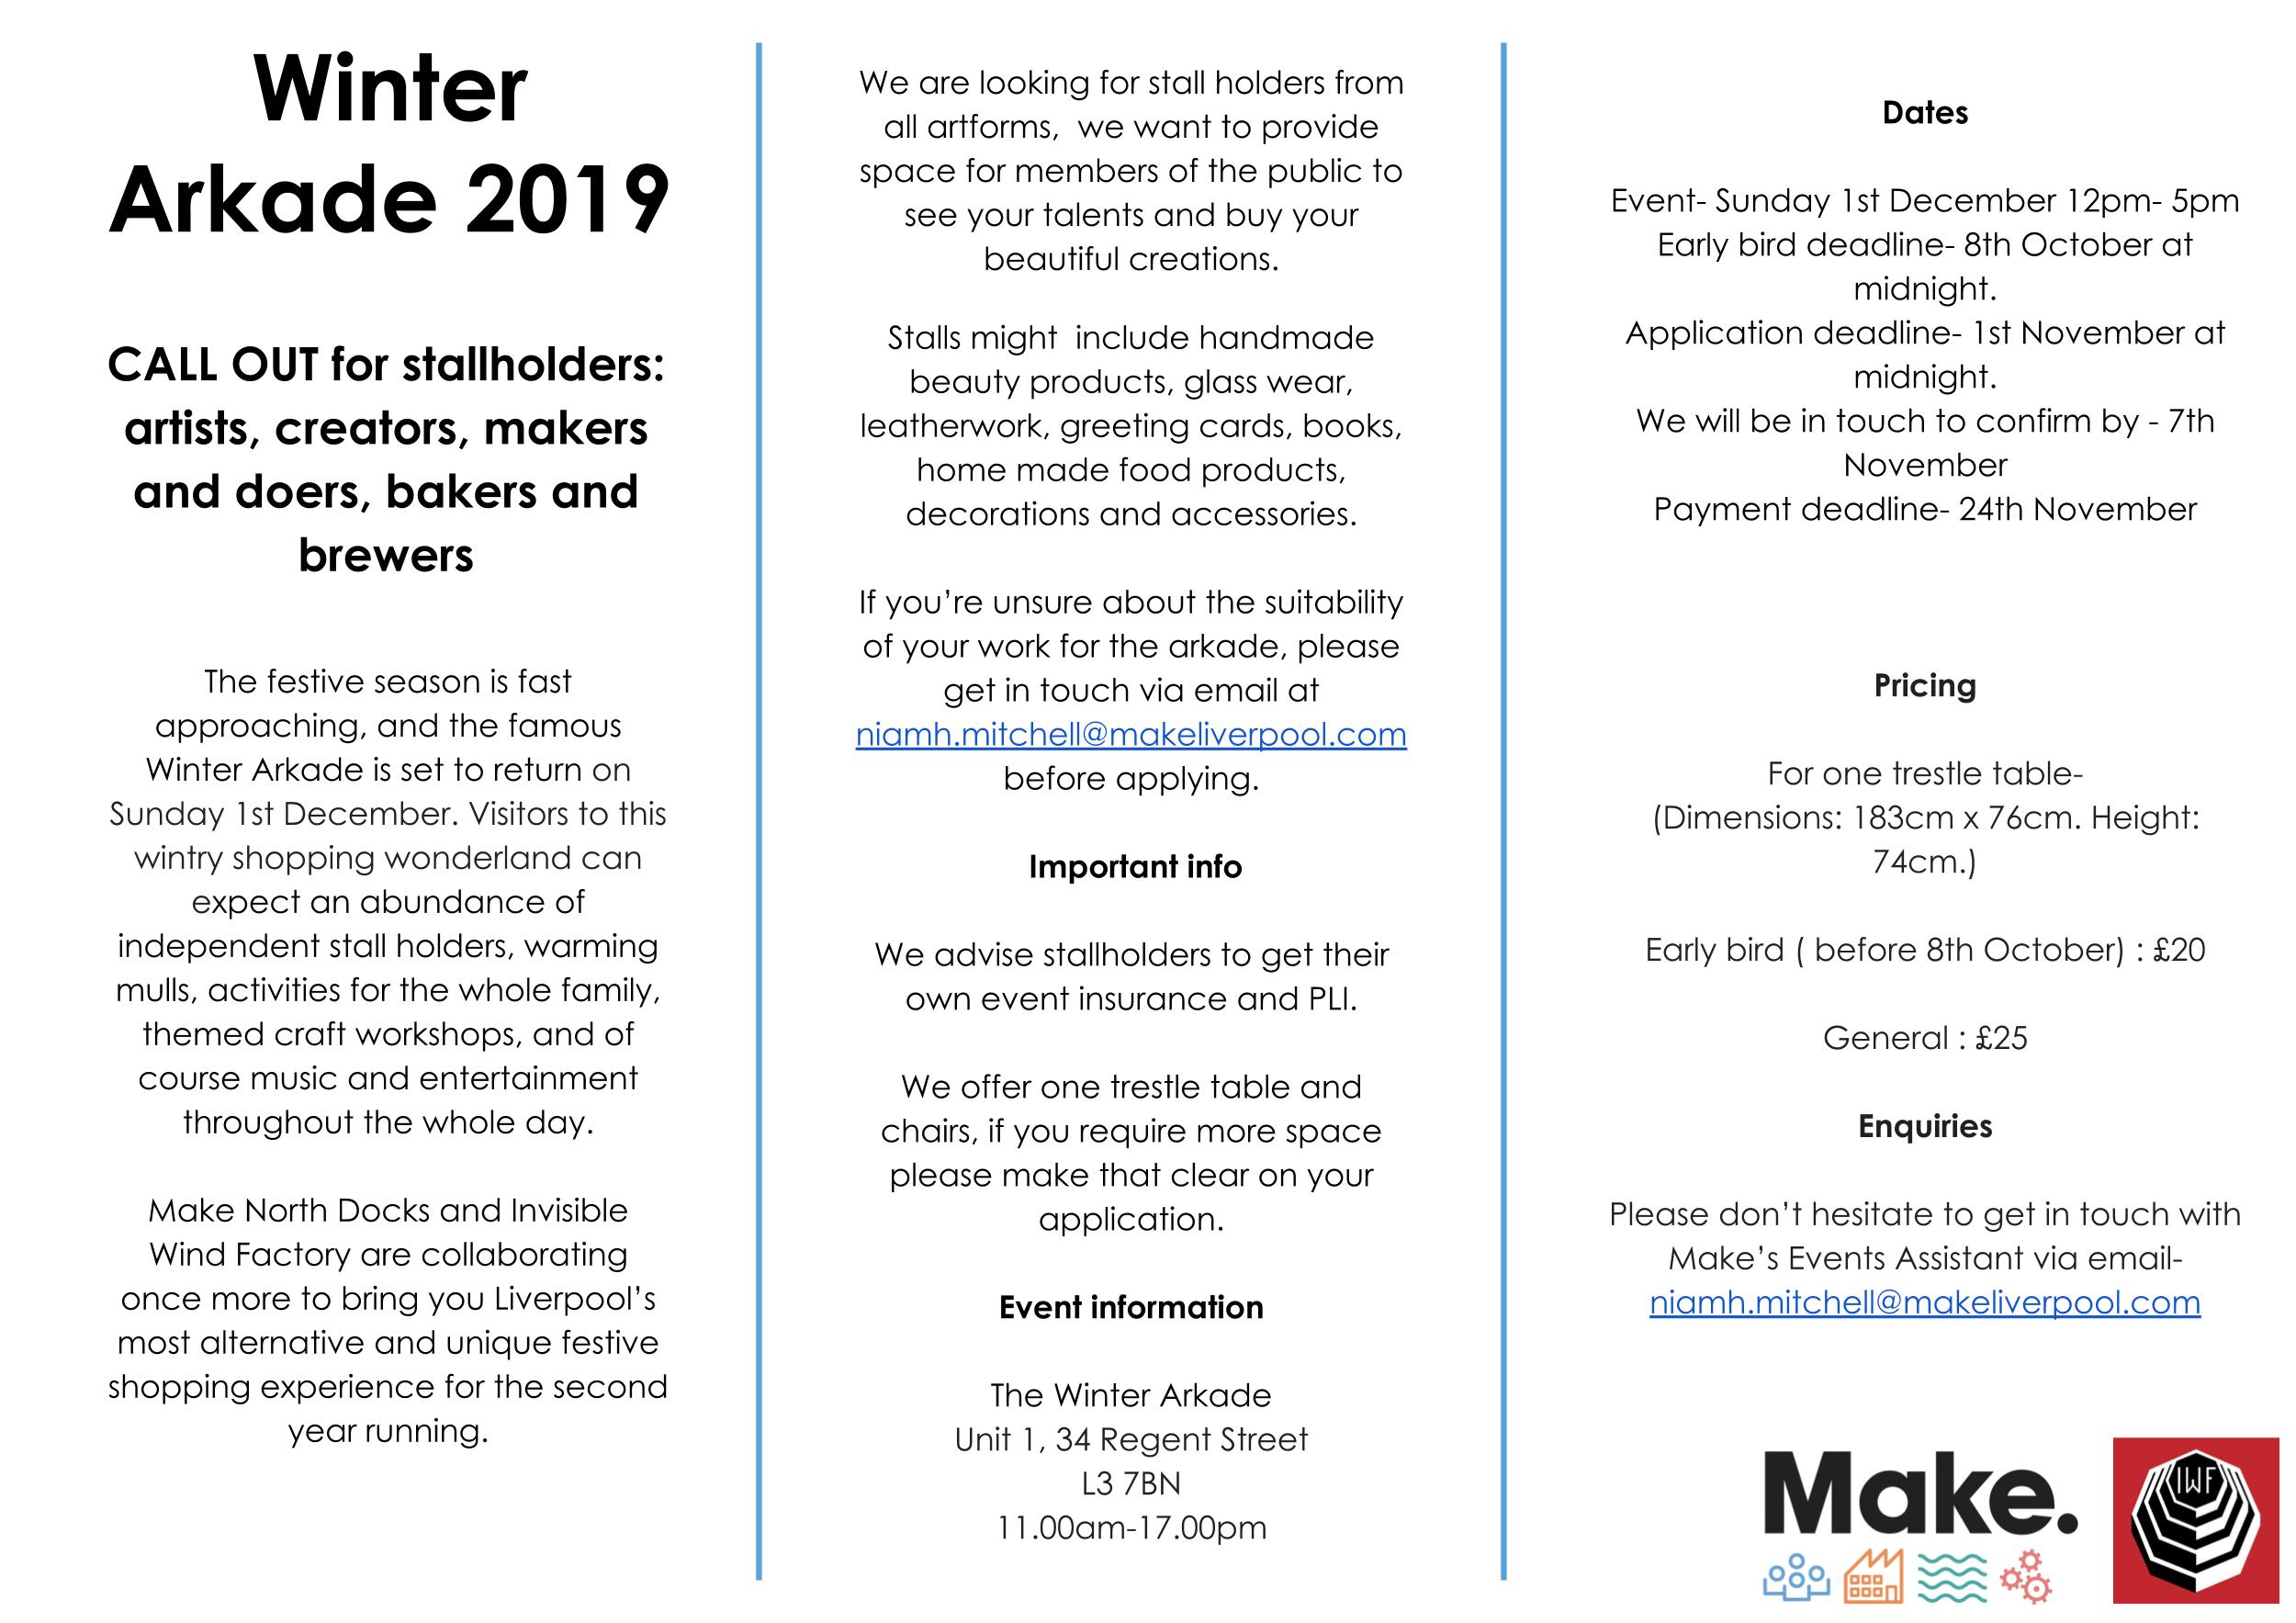 Winter Arkade stallholders call out information 